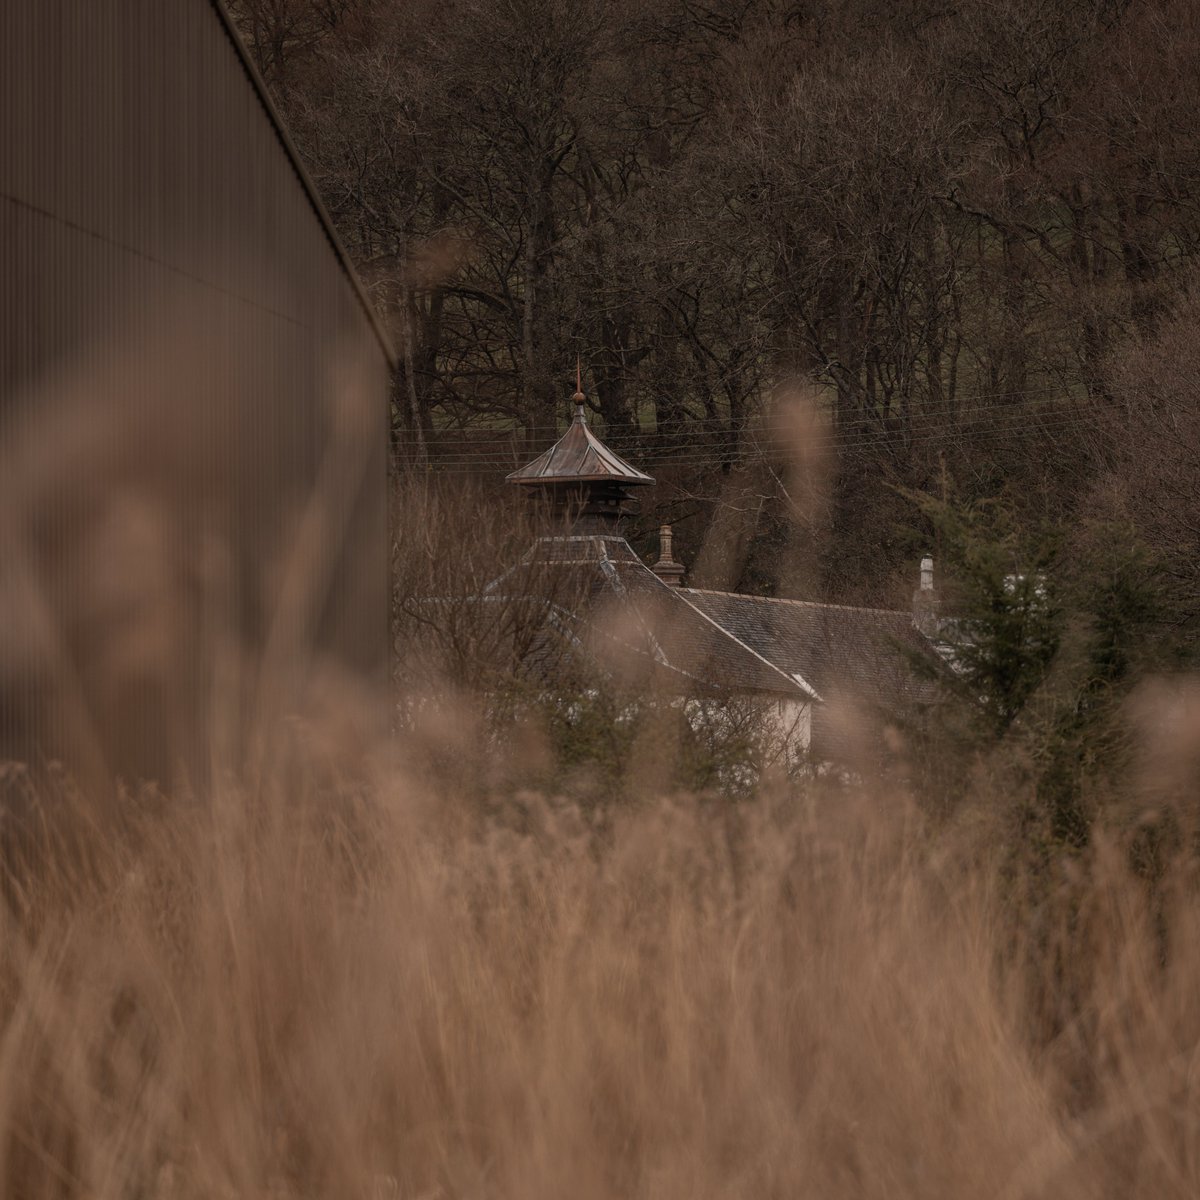 From the barley to the water to the wood, every drop of Glengoyne is brought to you through elements of nature working together in harmony. So our Distillery has to work in harmony with our natural surroundings too. We don't just want to be proud of our past, but also our future.